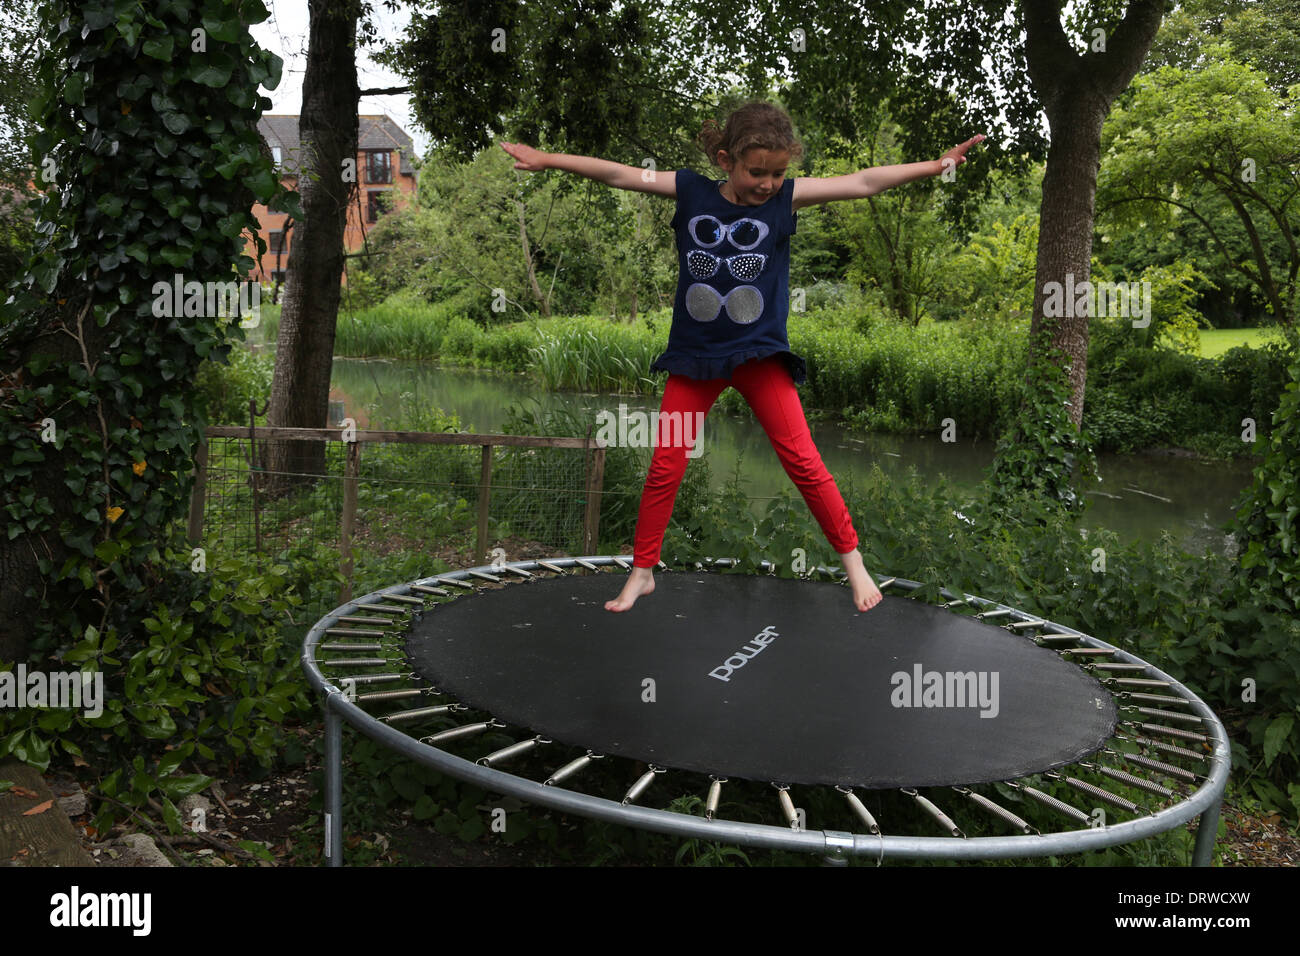 Young Girl Doing Star Jumps On A Trampoline In Garden By The River Stour Gillingham Dorset England Stock Photo